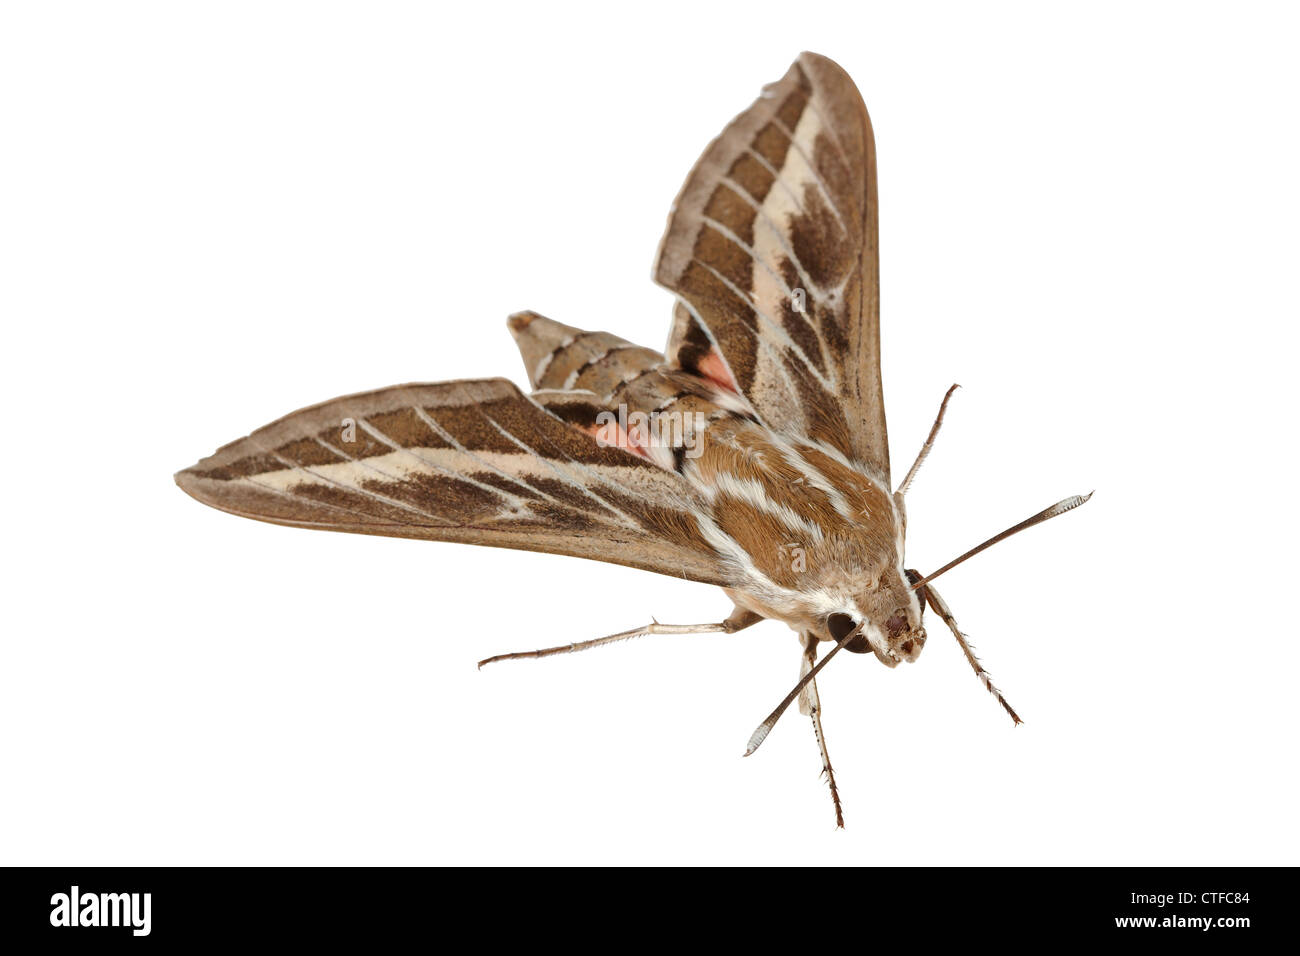 Bedstraw Hawk-Moth or Gallium Sphinx (Lat. Hyles gallii), isolated on a white background Stock Photo